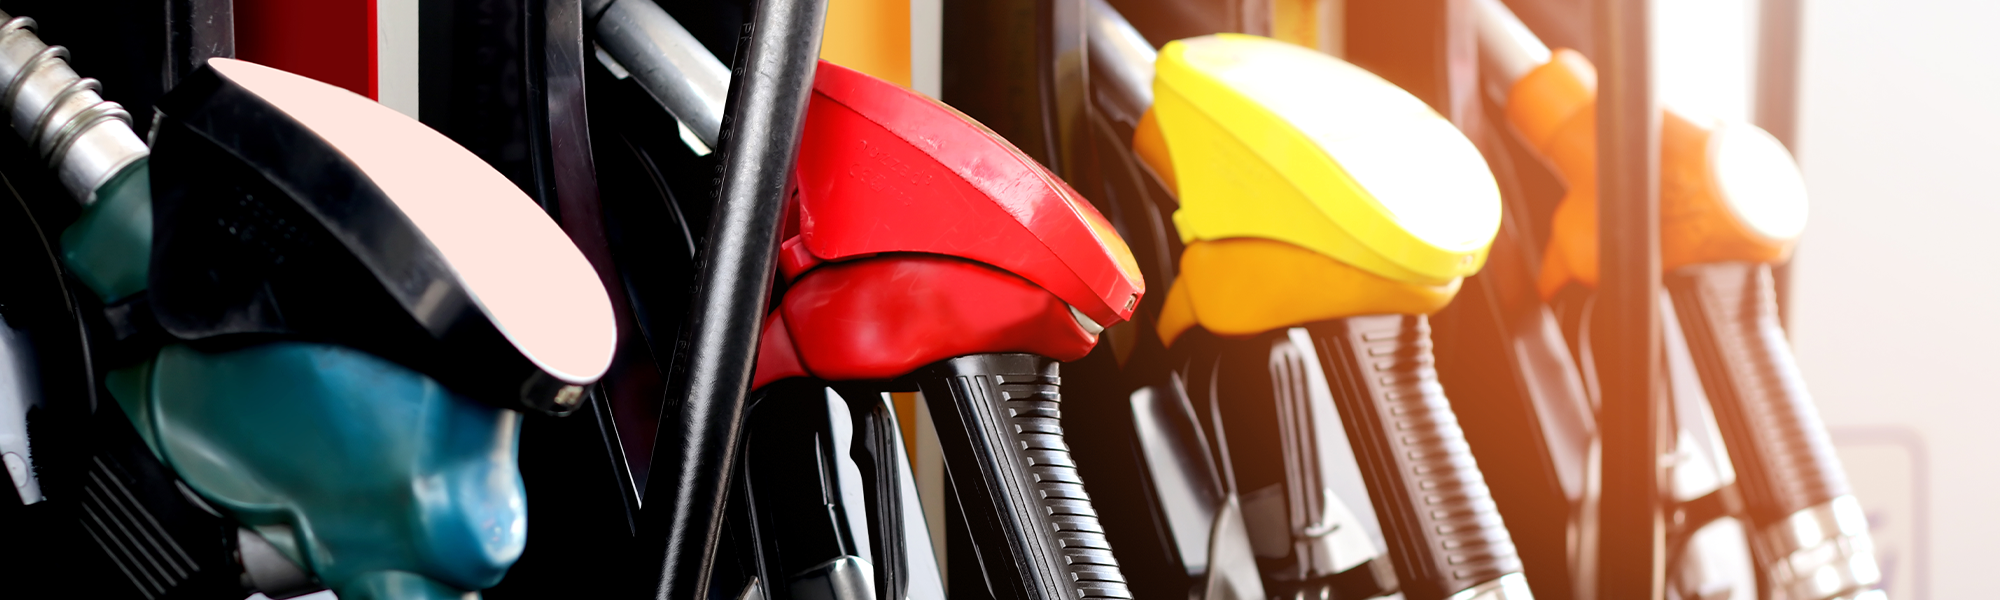 How Do Fuel Pumps Know When Your Fuel Tank Is Completely Full?